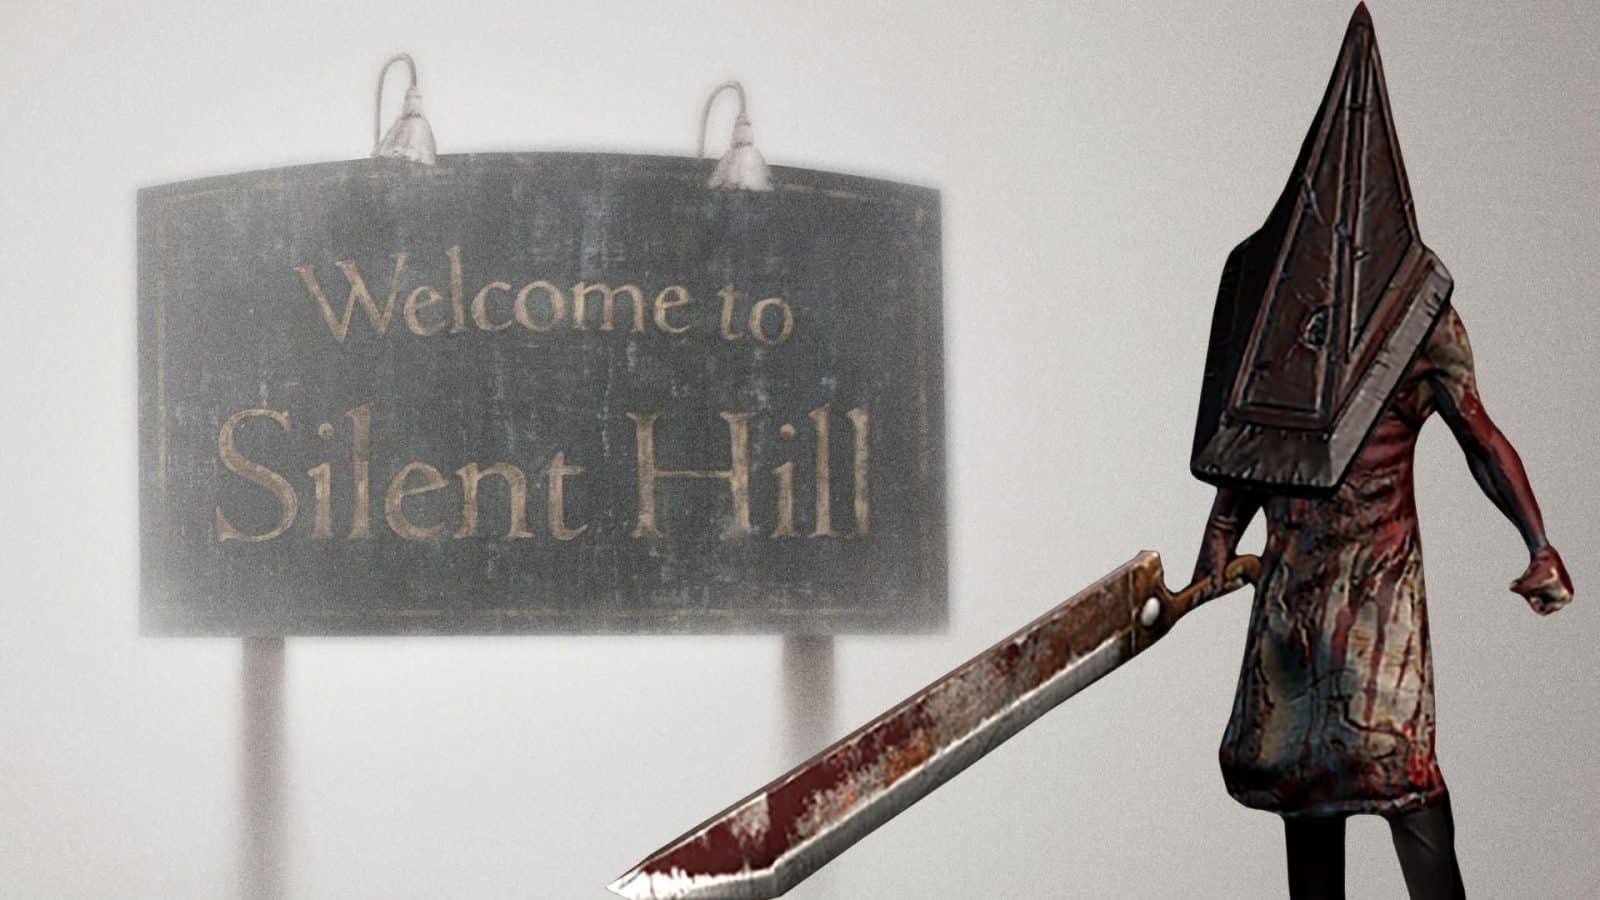 Silent Hill leaks suggest Sony working on horror game revival - Dexerto